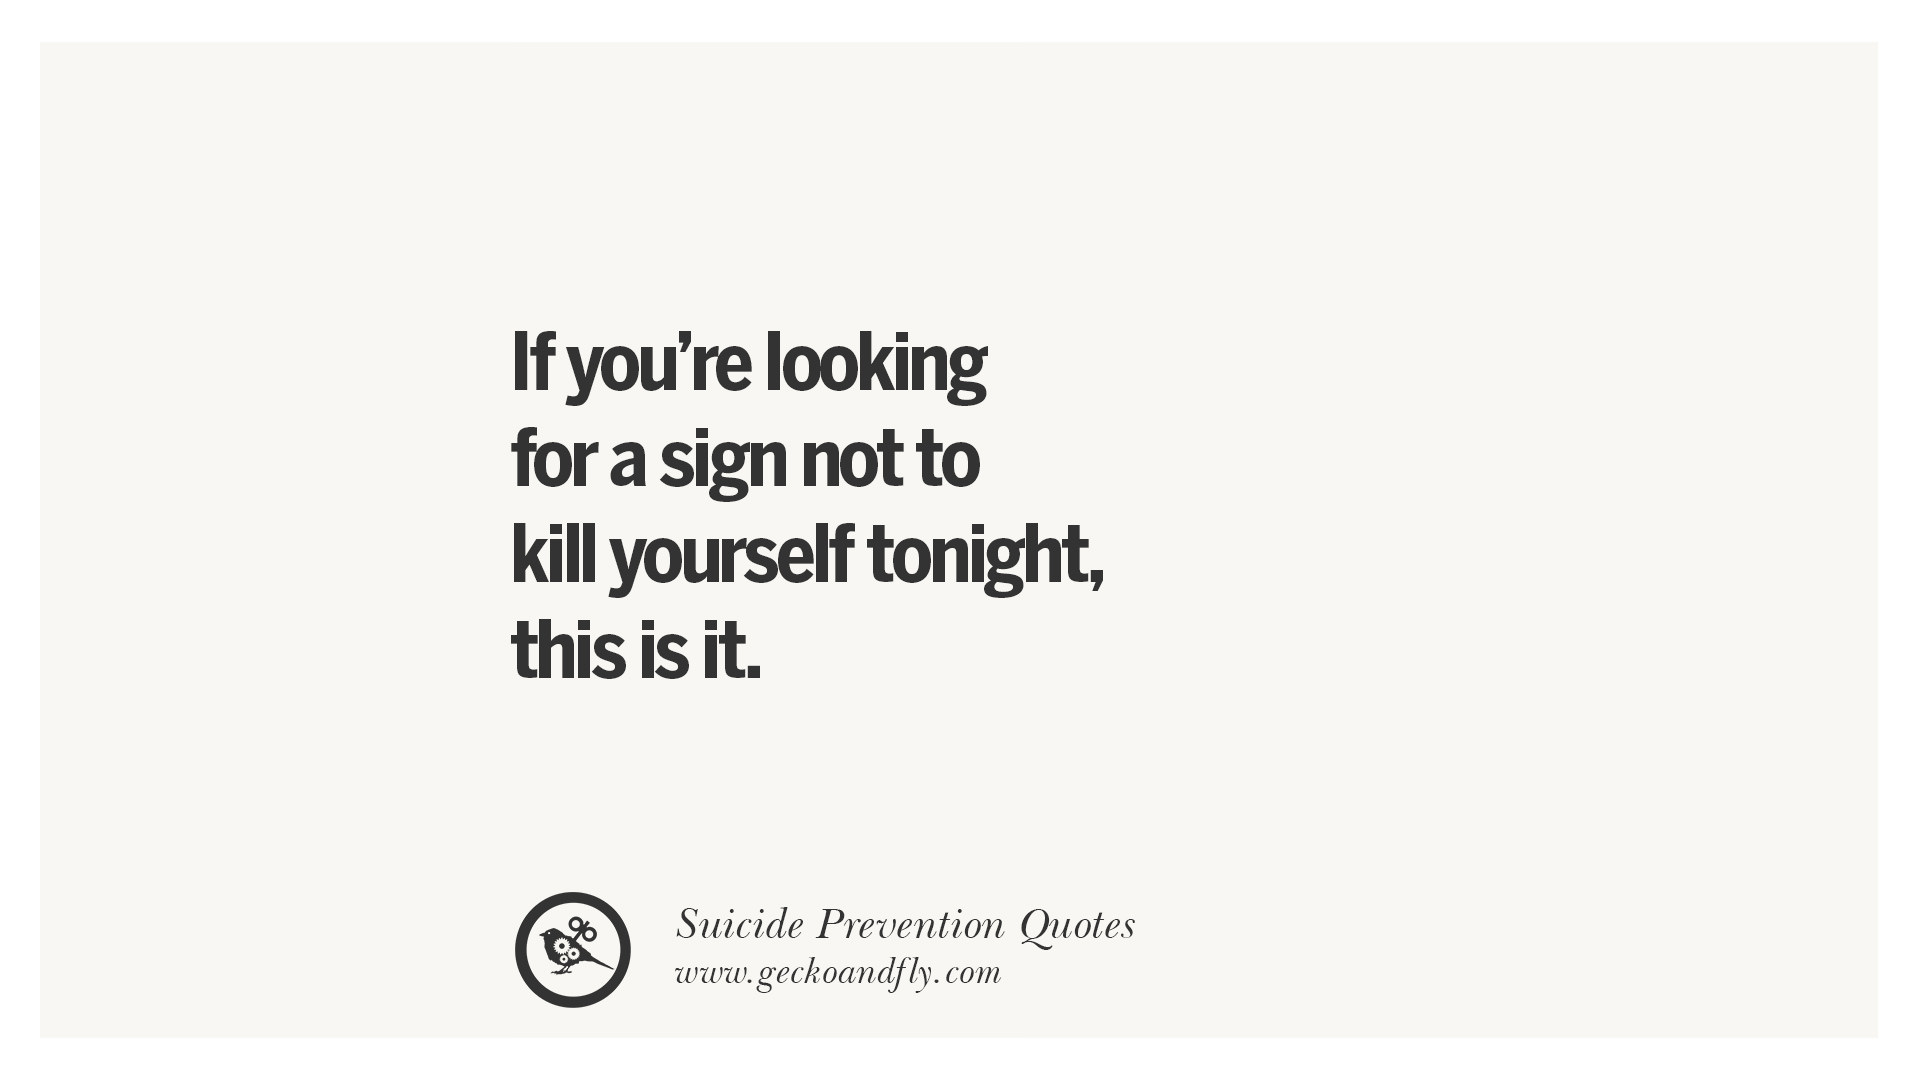 30 Helpful Suicidal Prevention Ideation Thoughts And Quotes.